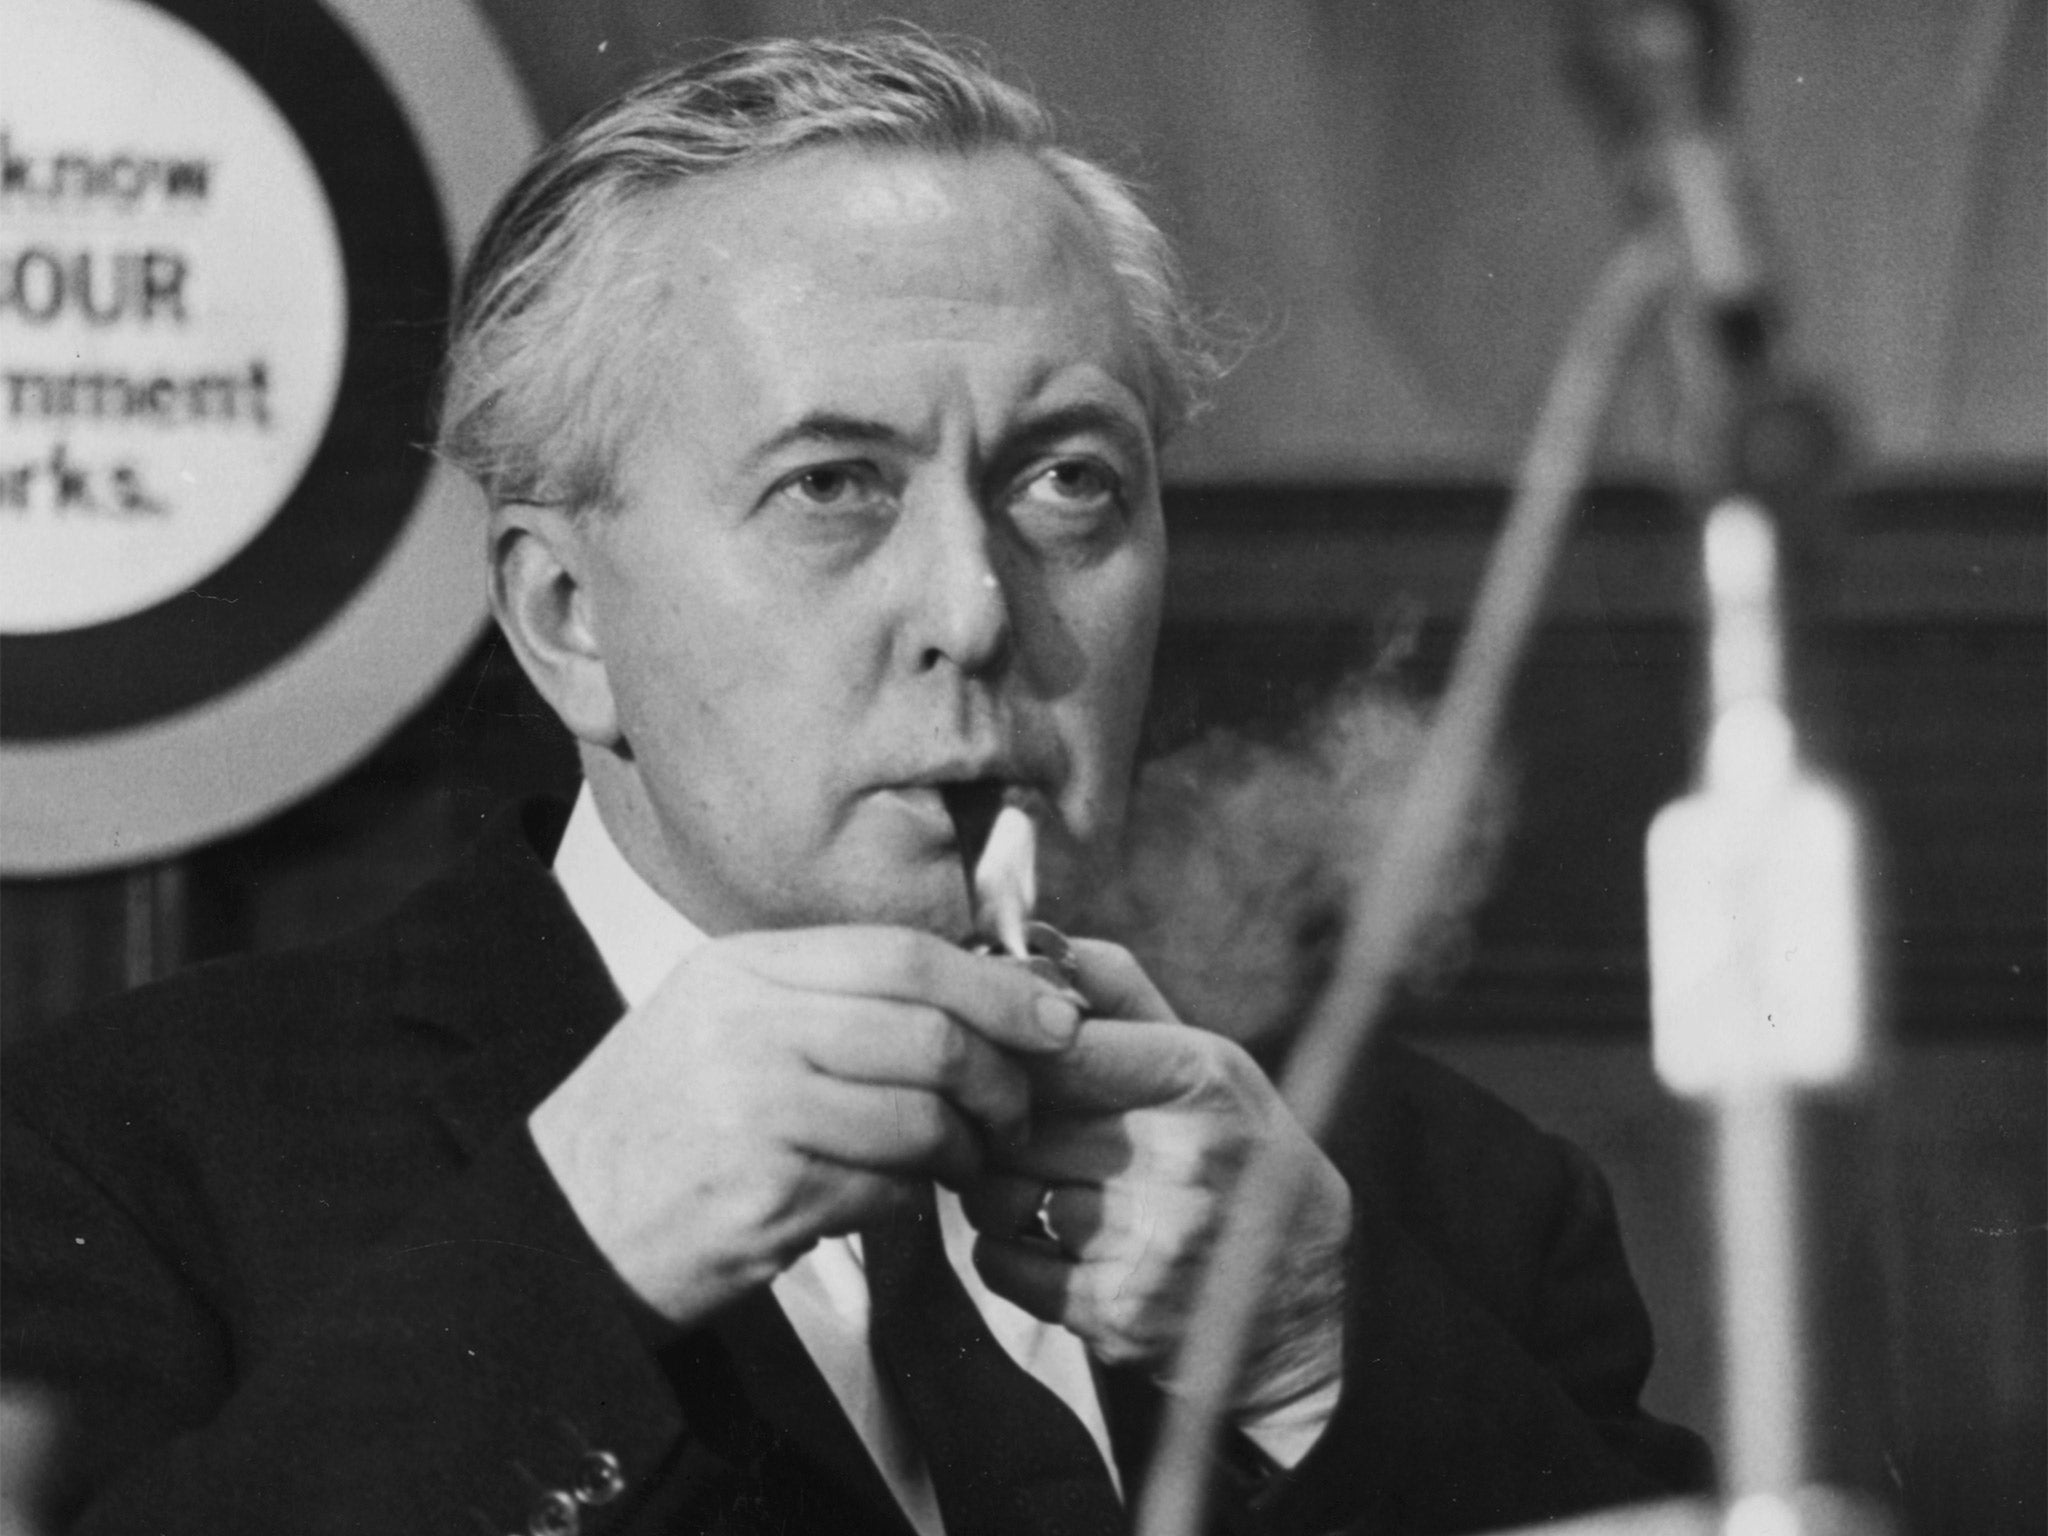 &#13;
Harold Wilson tried to clarify the security of MPs’ phones and communications in 1966 (Getty)&#13;